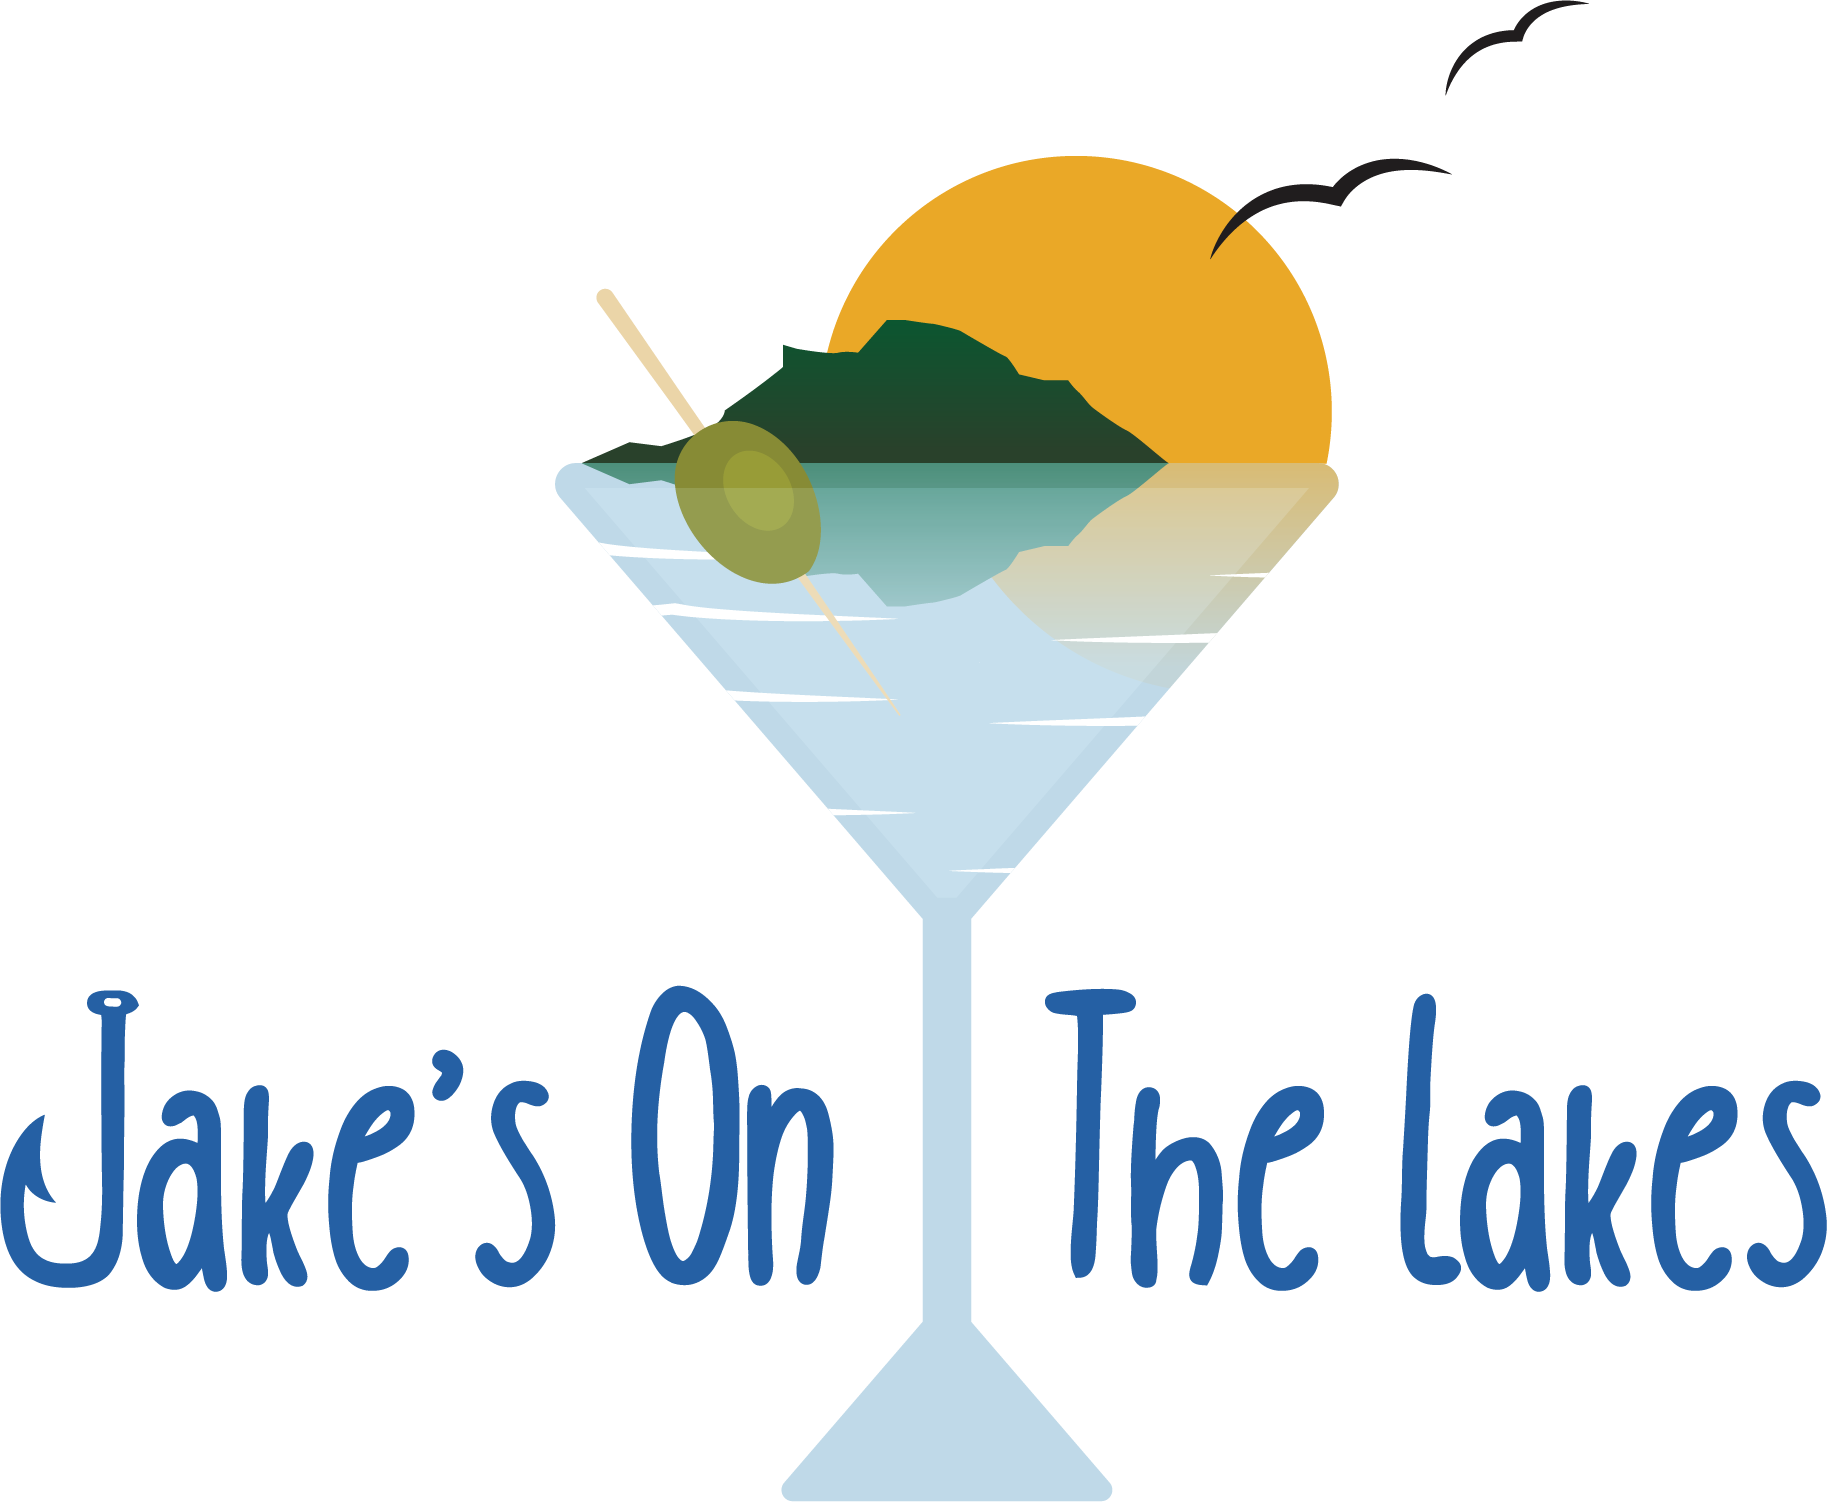 Jake's on the Lakes